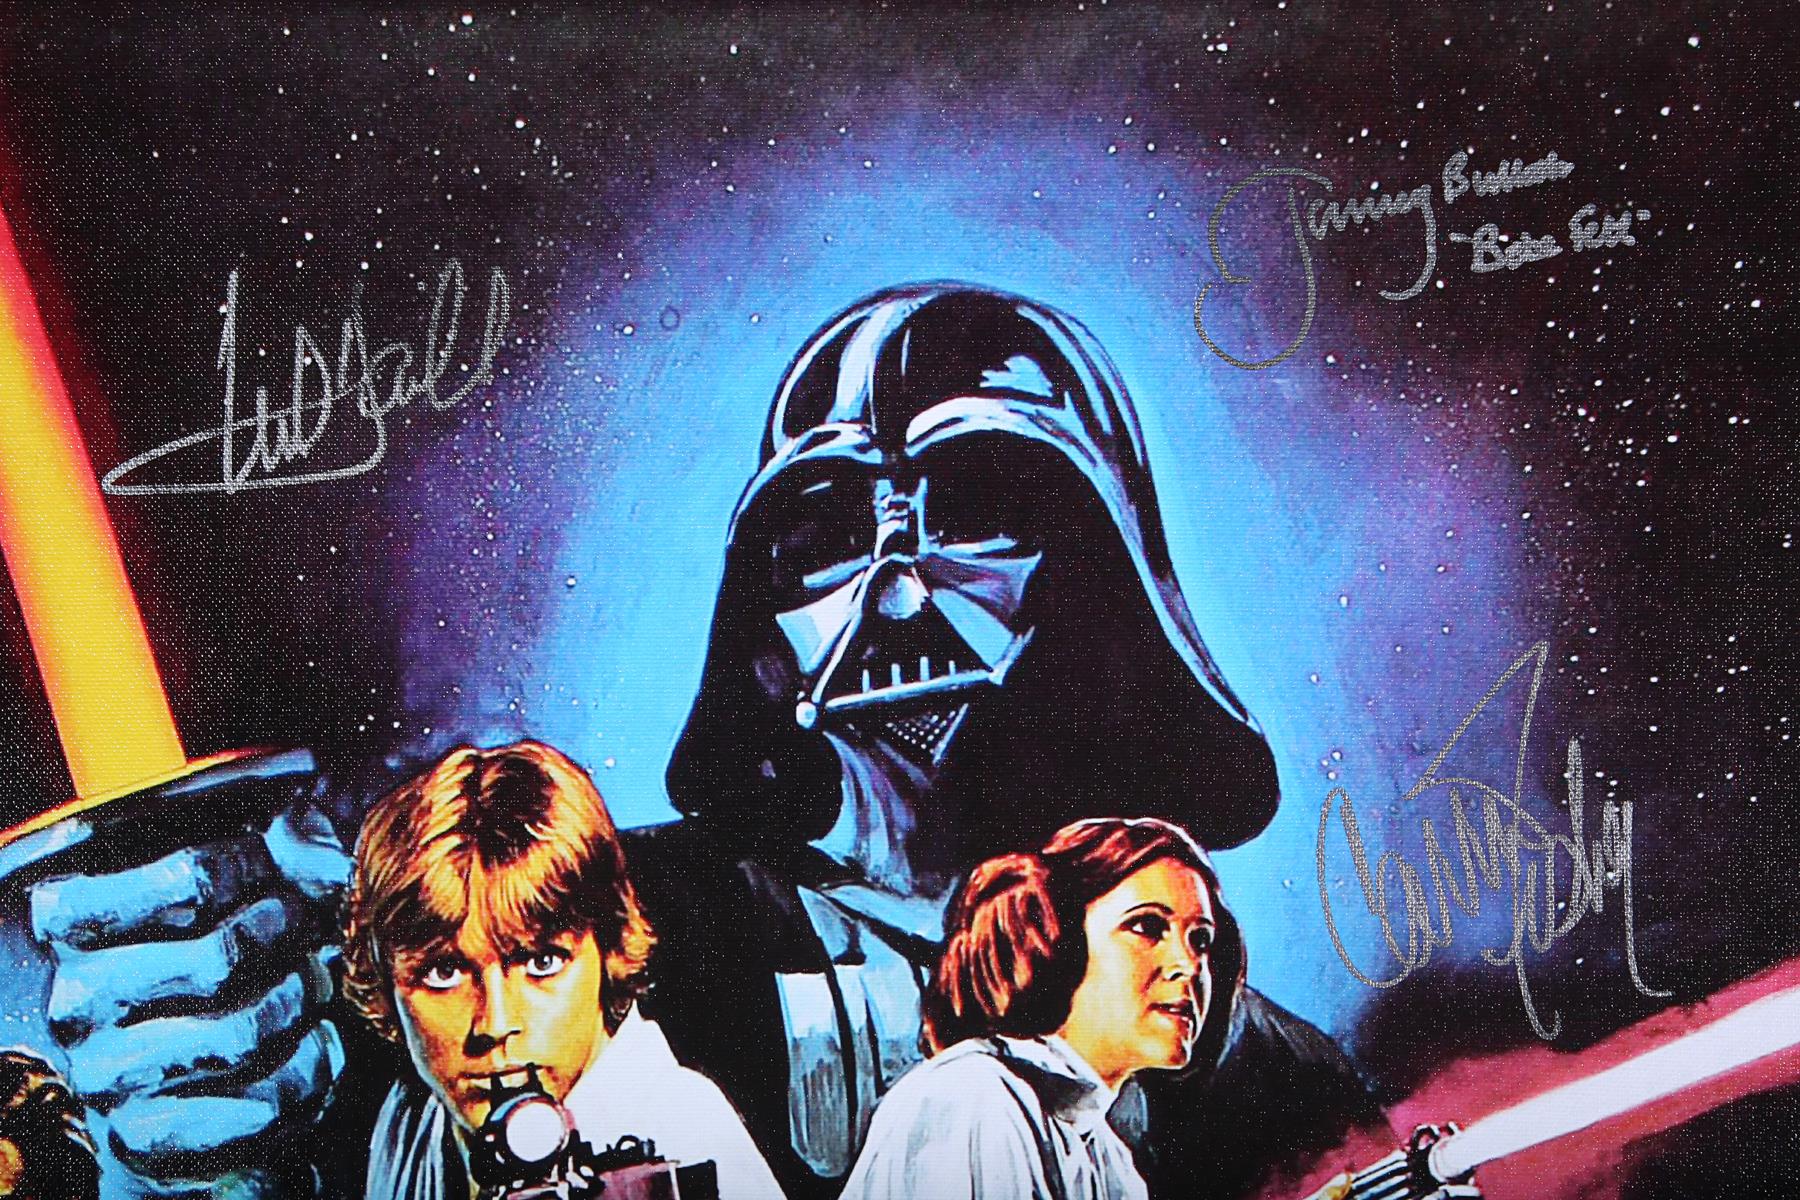 STAR WARS: A NEW HOPE (1977) - Autographed One-Sheet "Style C" Canvas Poster - Image 2 of 5